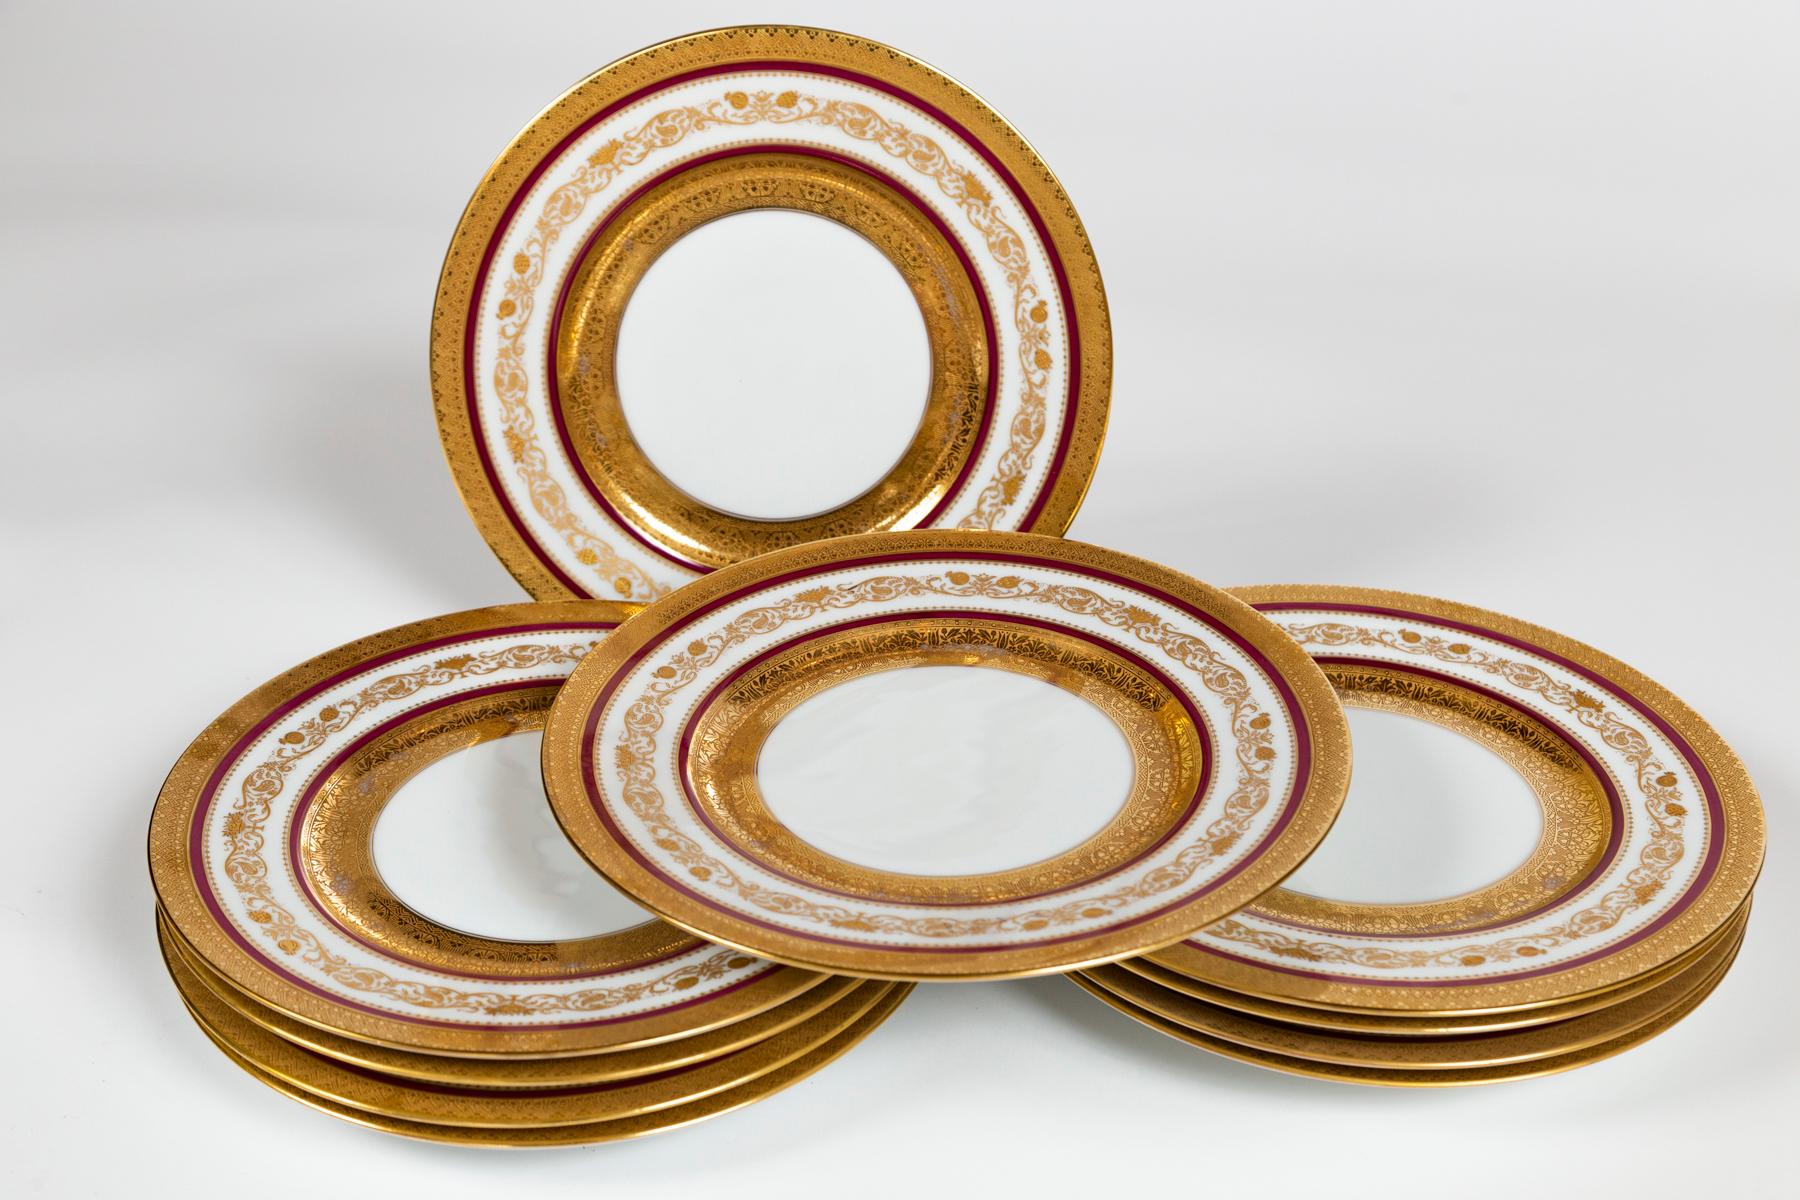 Antique Hutschenreuther Dinner Plates, Early 20th Century, Bavaria For Sale 3